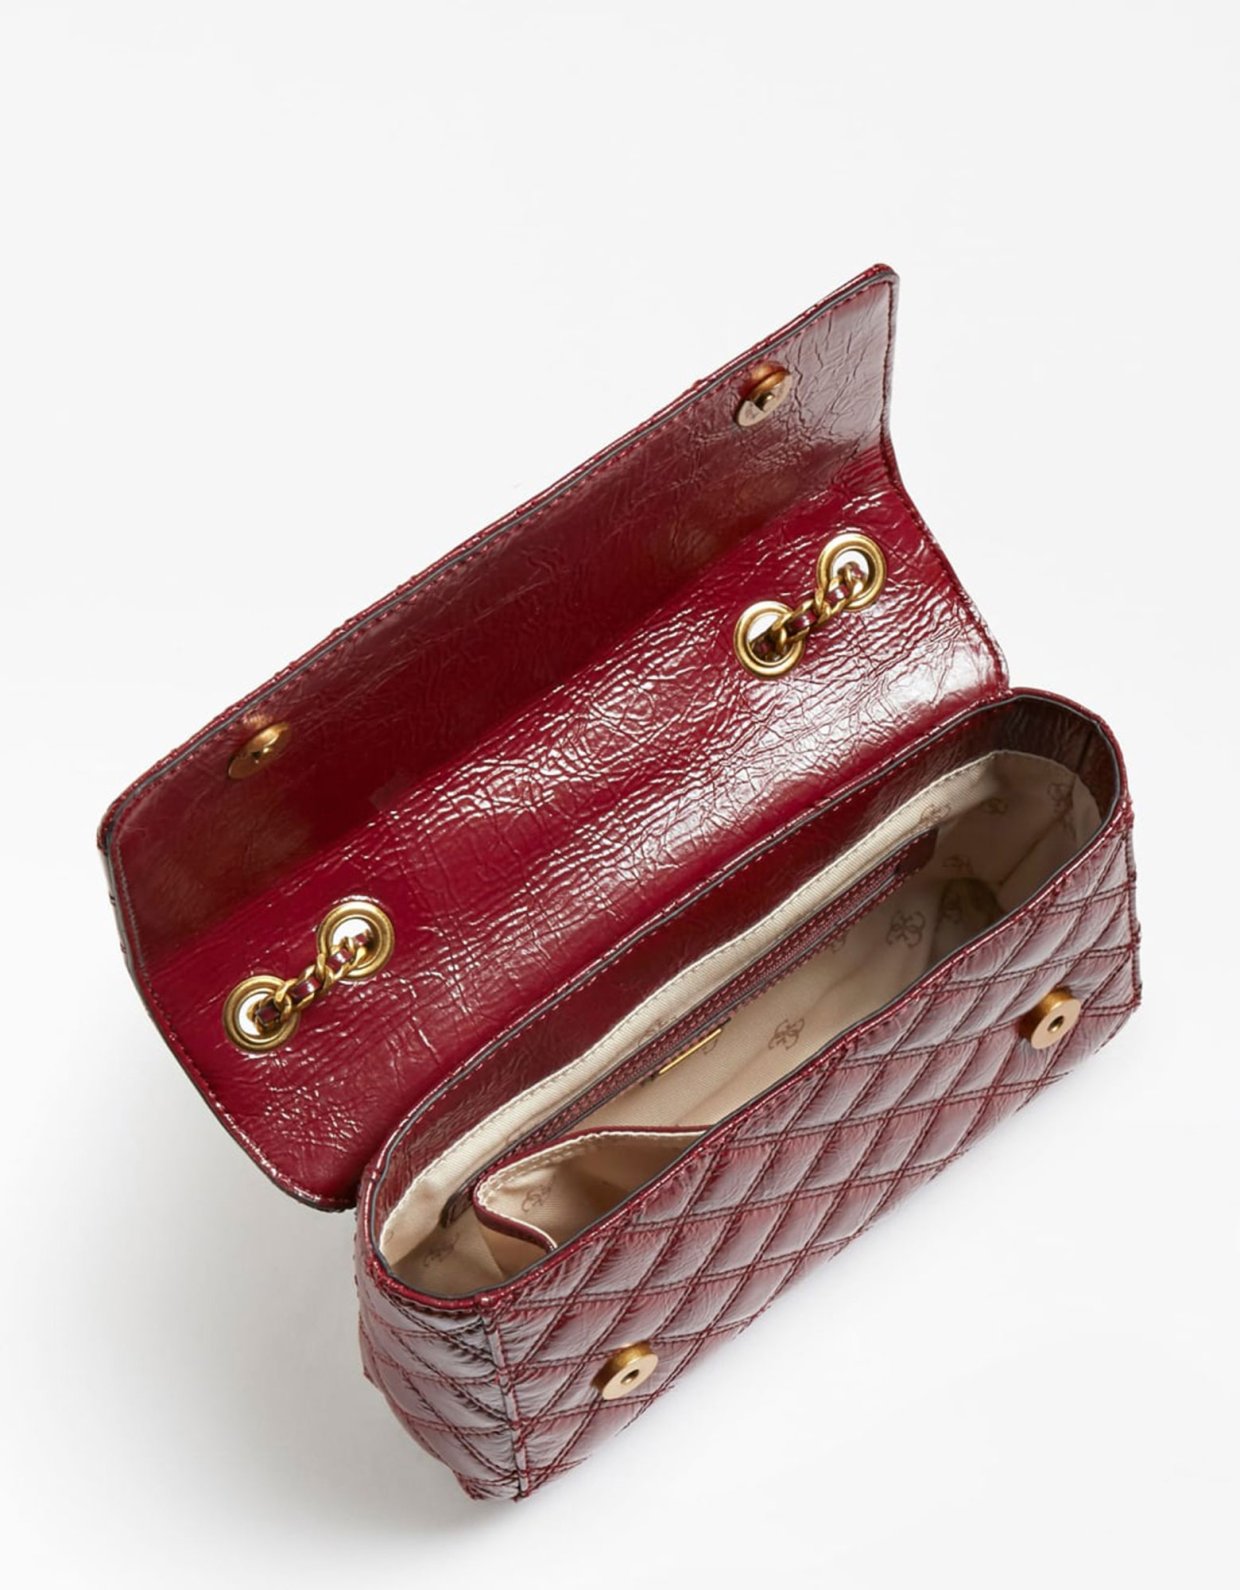 Guess Cessily convertible crossbody bag beet red